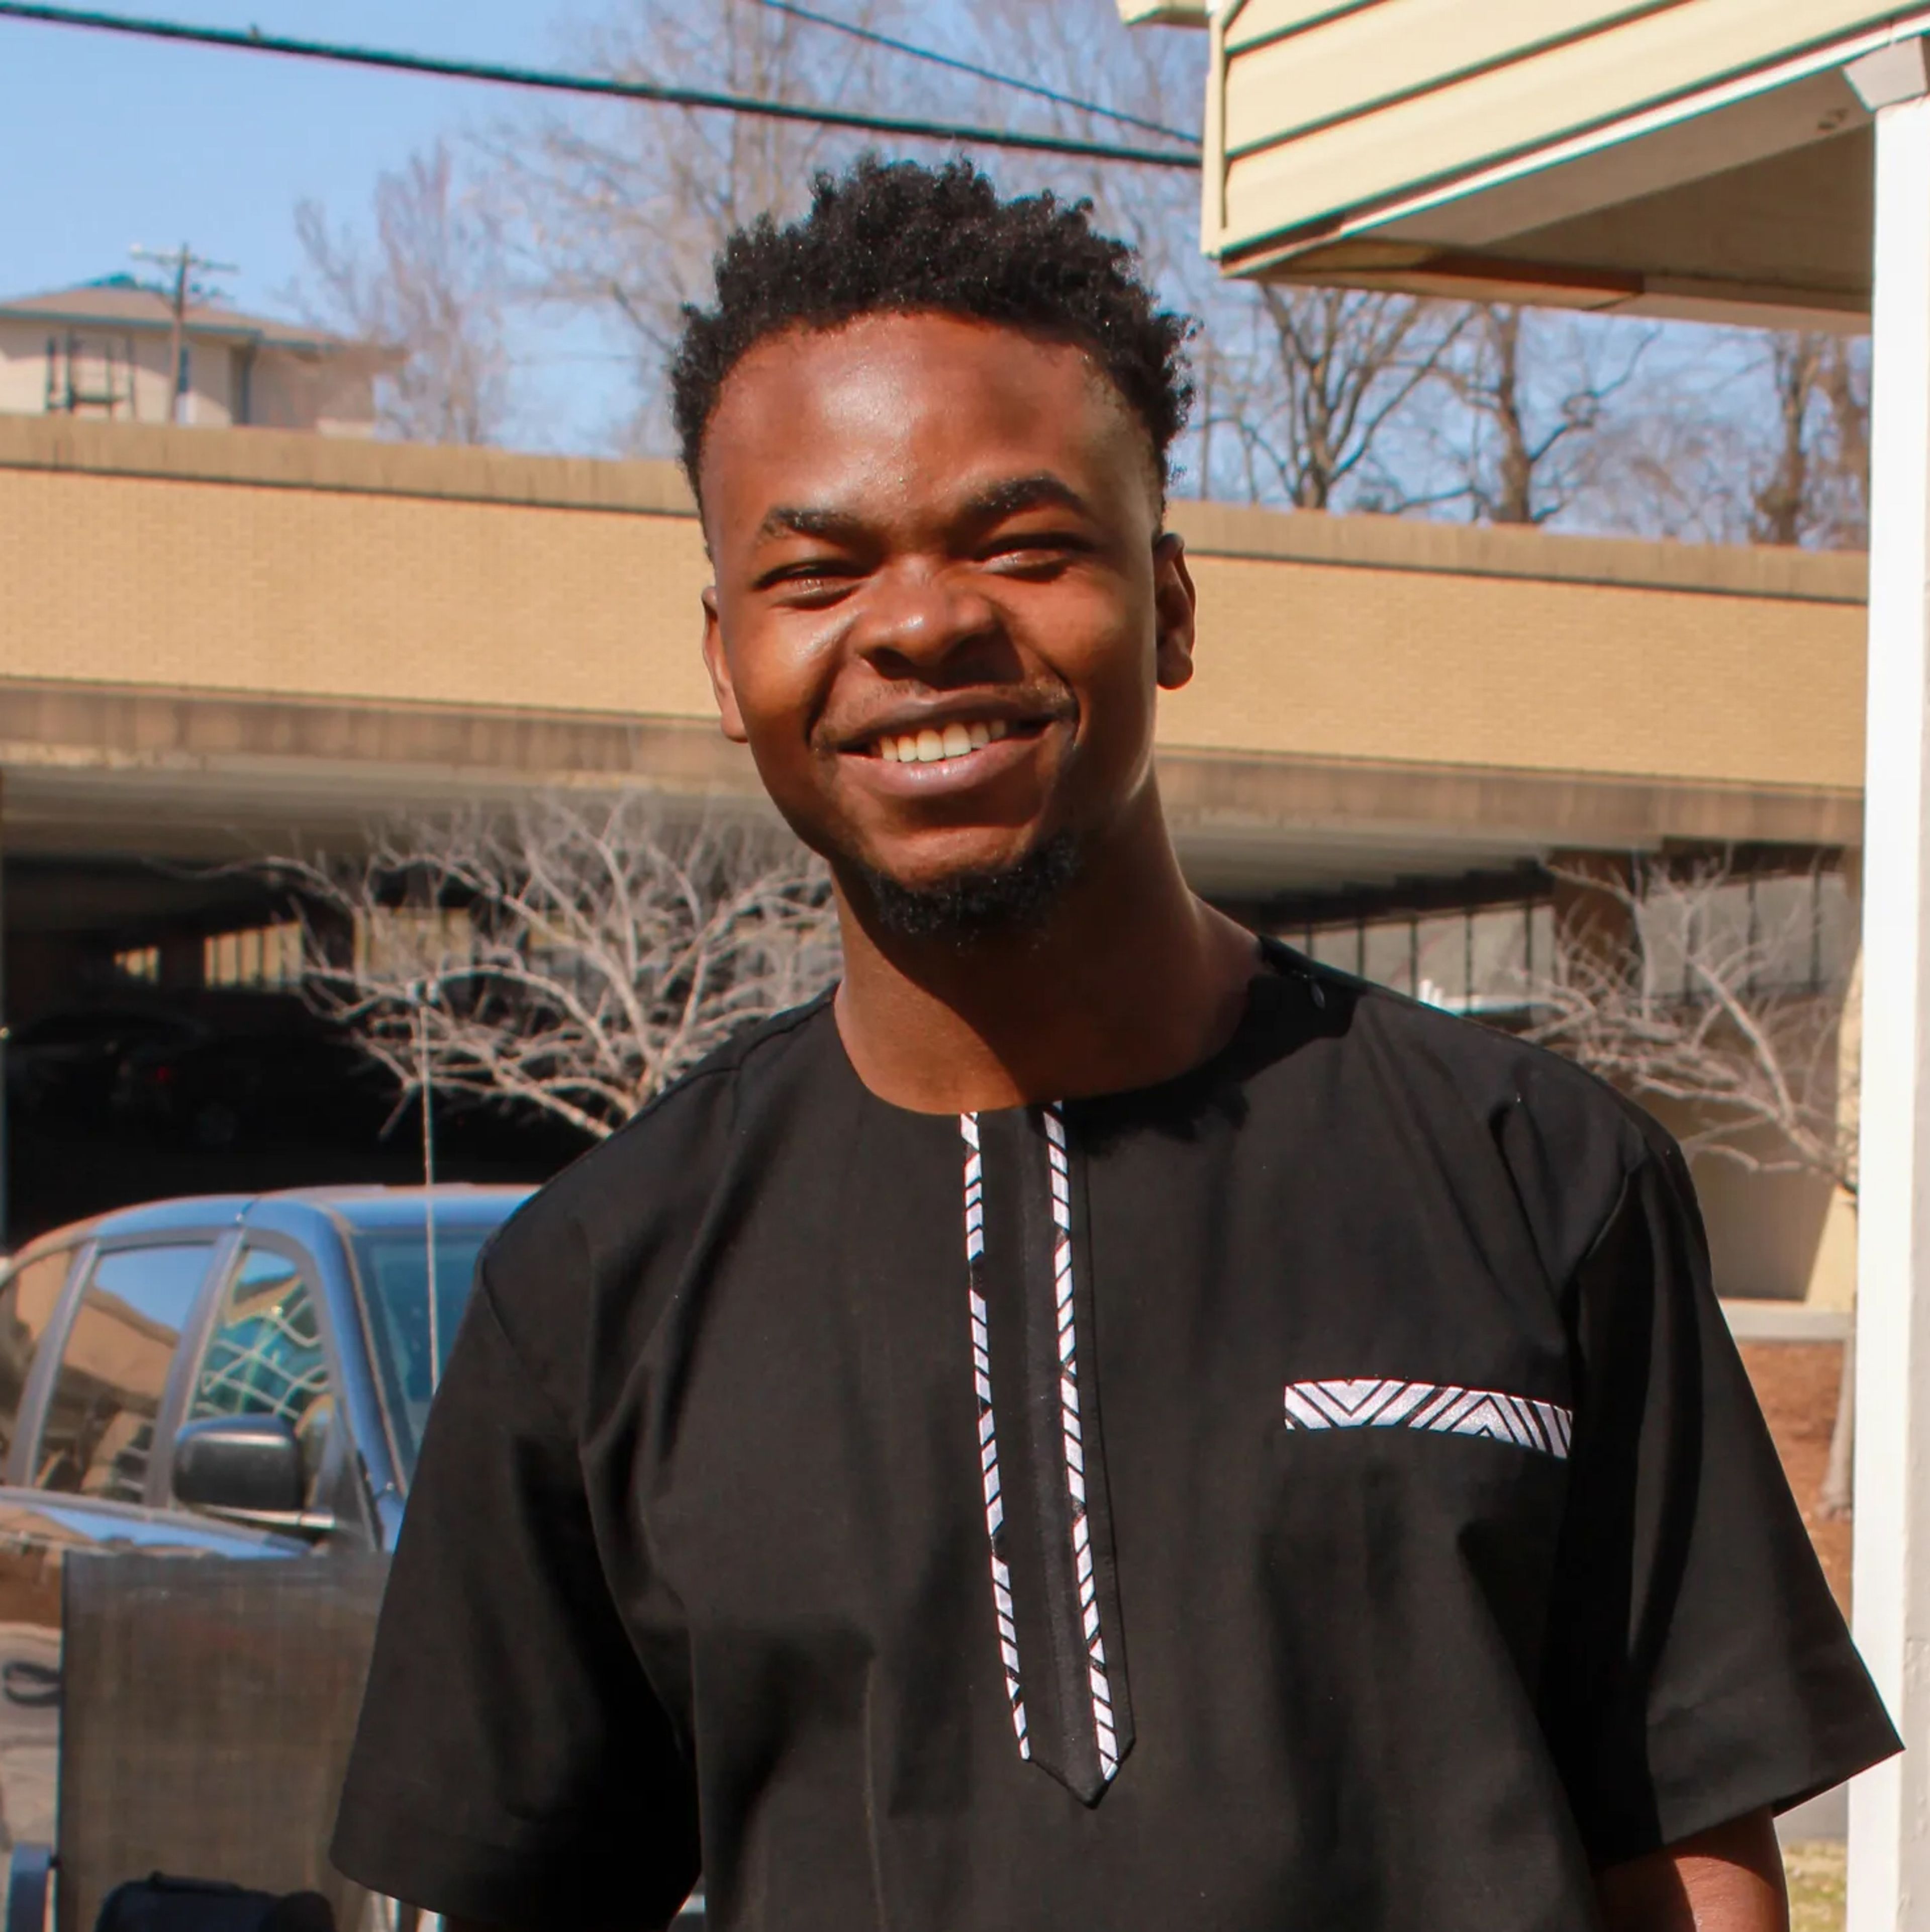 Zimbabwean SEMO student Chris Furusa provides nourishment and friendship for community through traditional African food